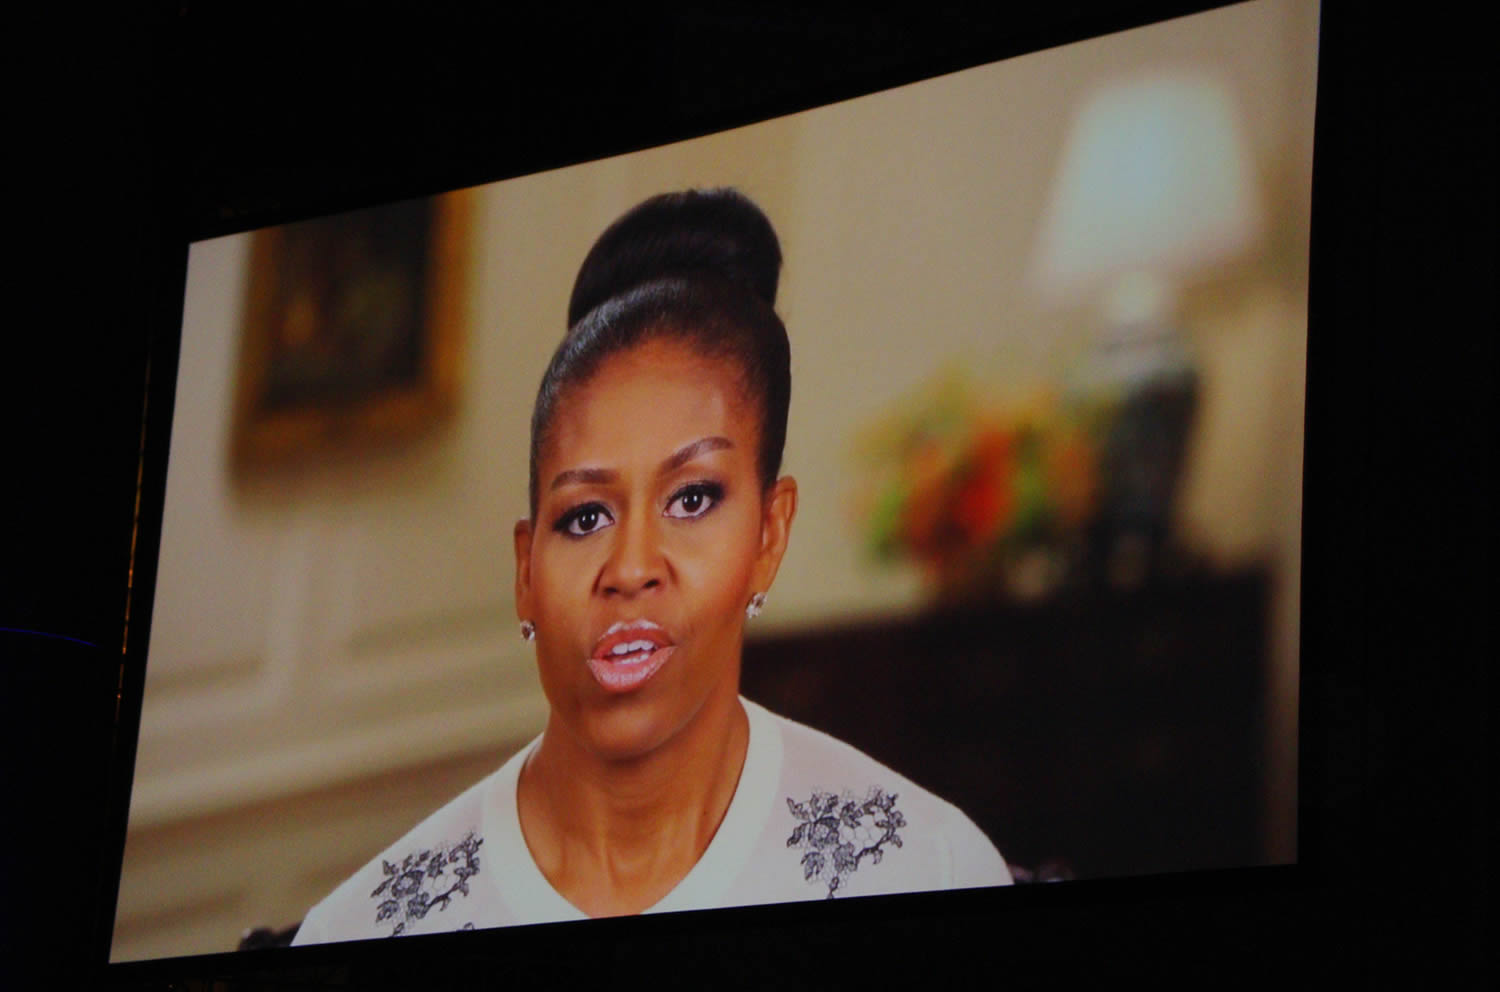 surprise speech on screen by michelle obama at the webby awards